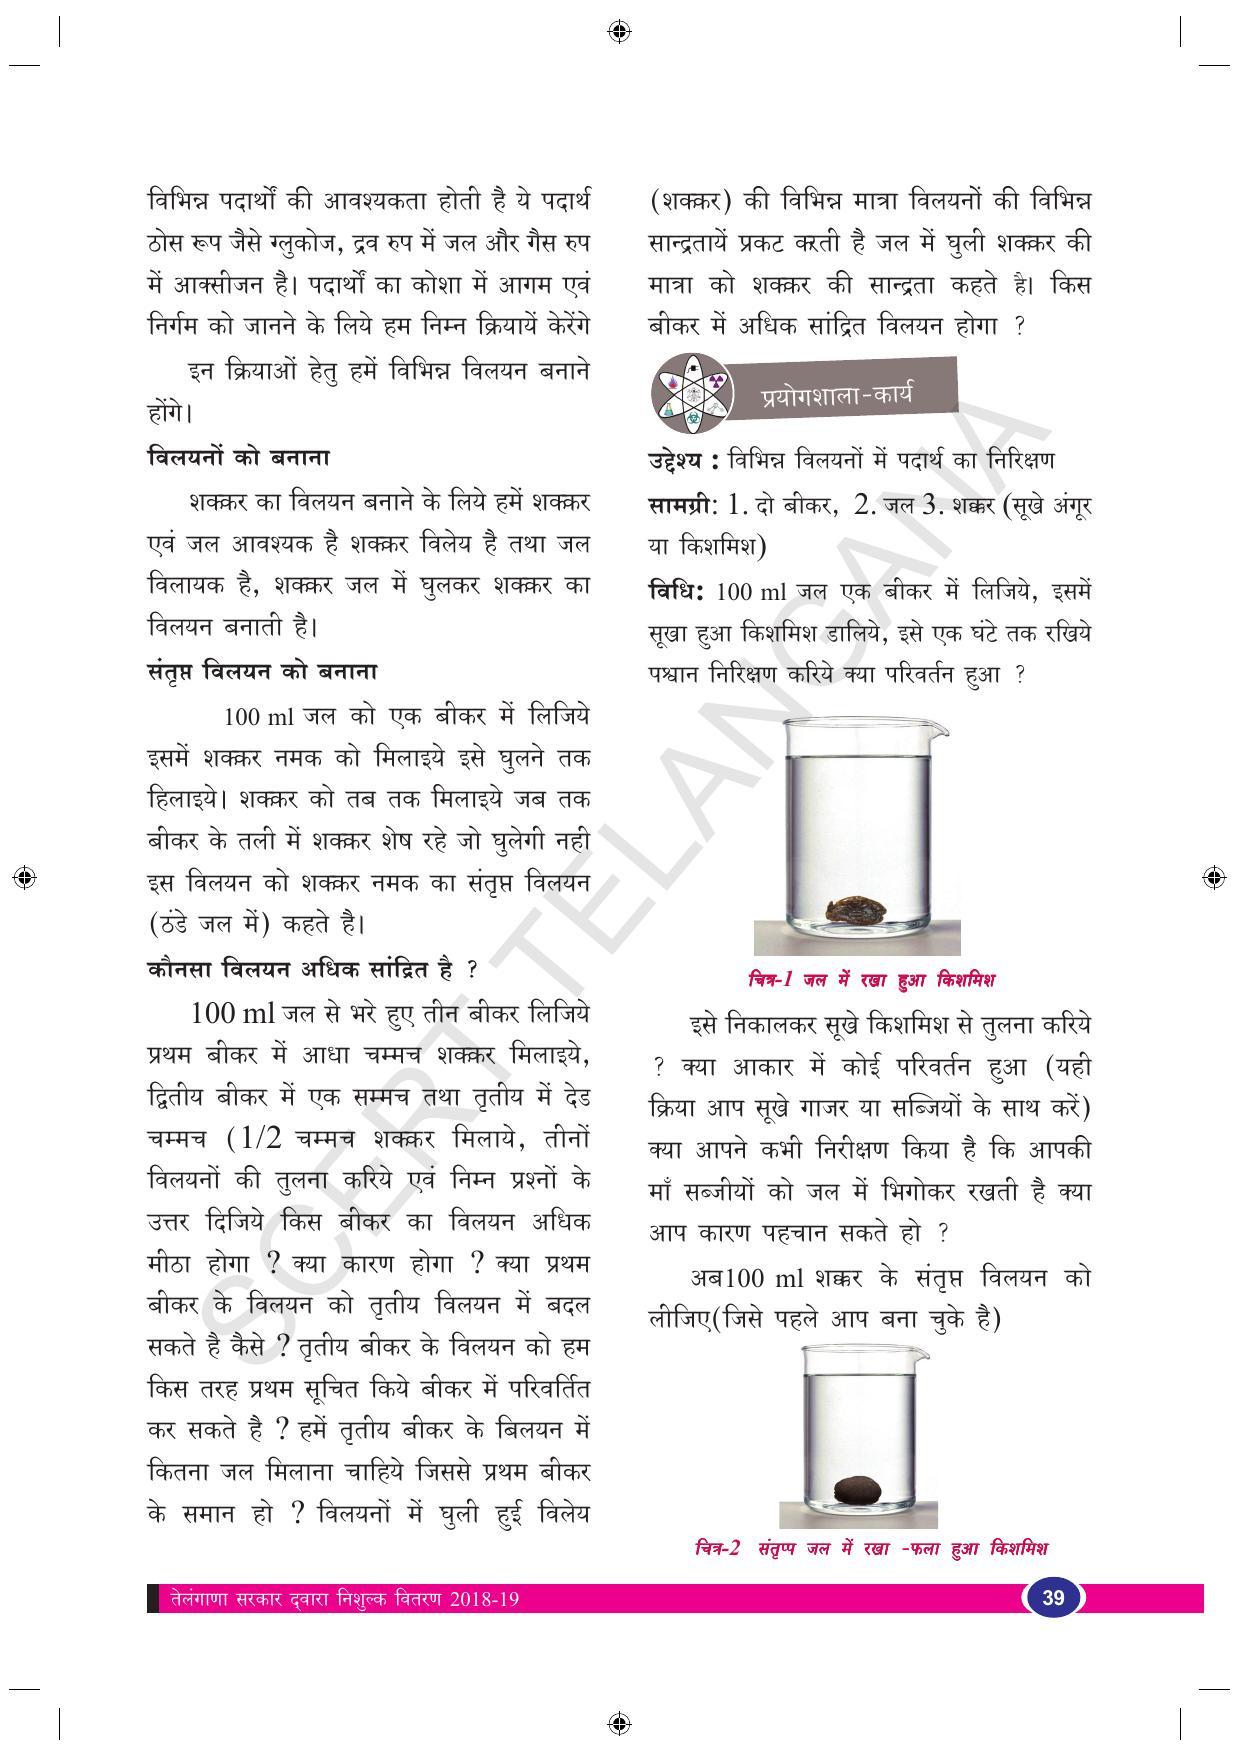 TS SCERT Class 9 Biological Science (Hindi Medium) Text Book - Page 51